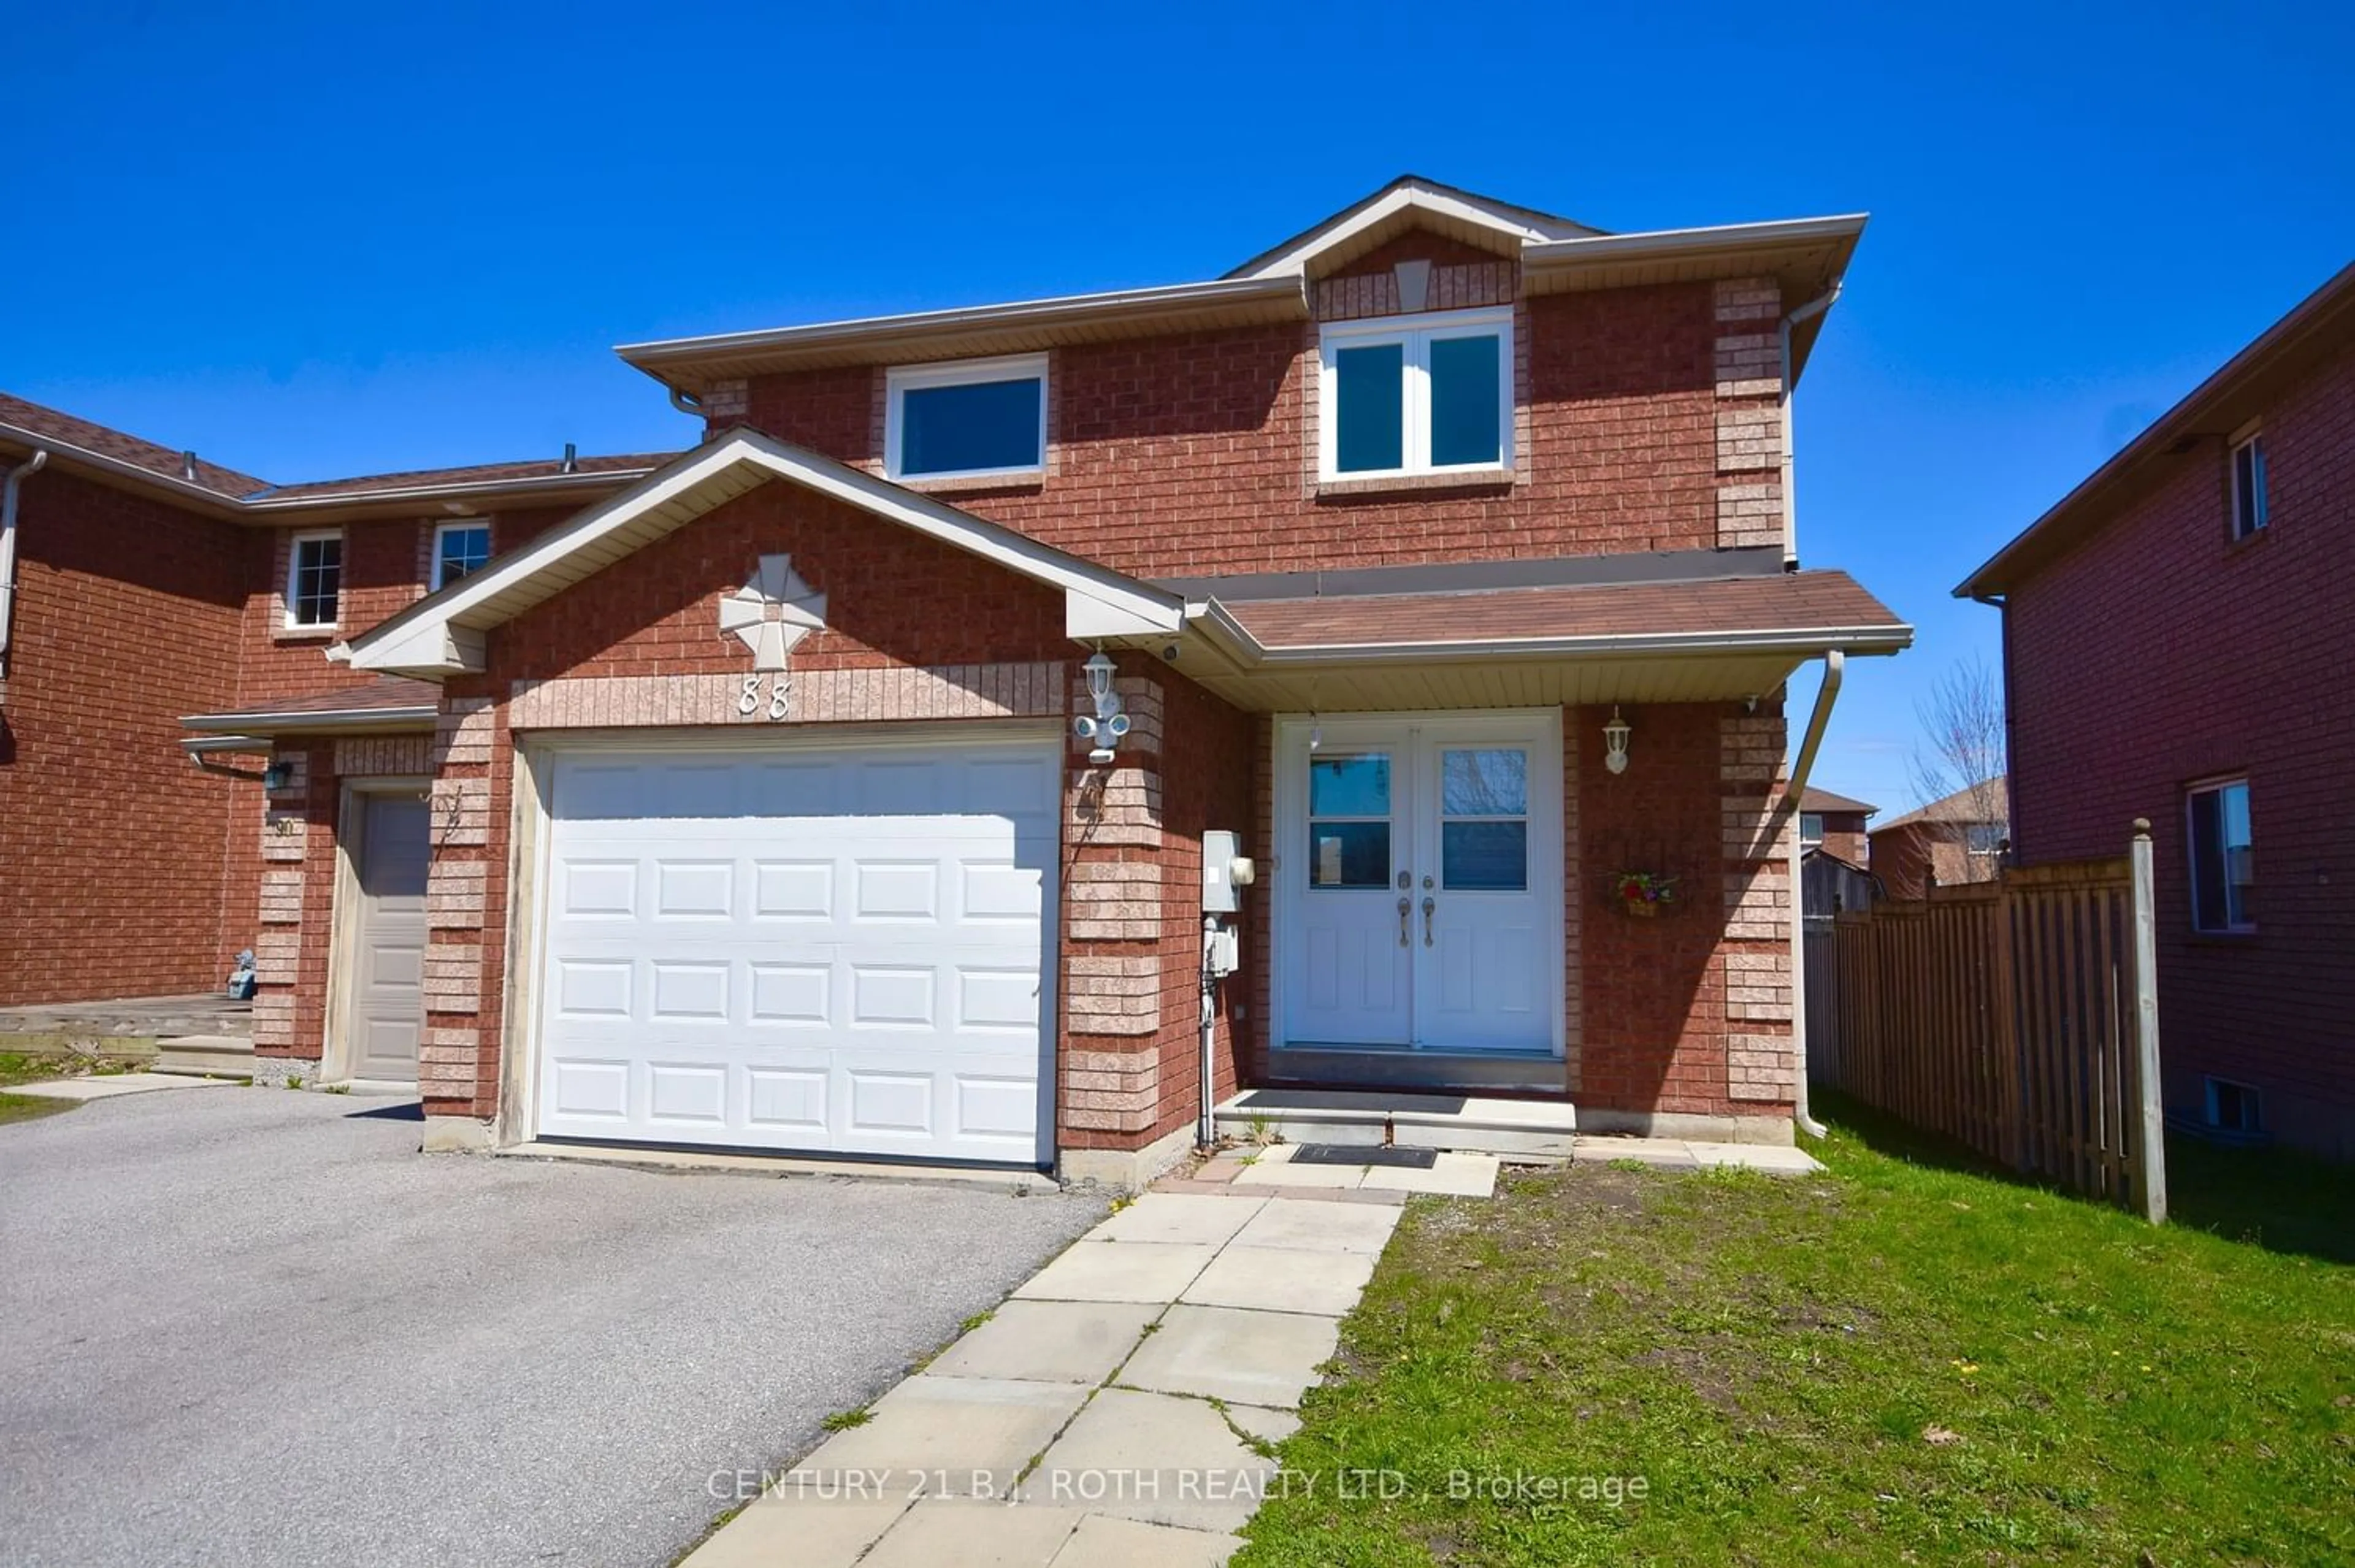 Home with brick exterior material for 88 Cheltenham Rd, Barrie Ontario L4M 6S7